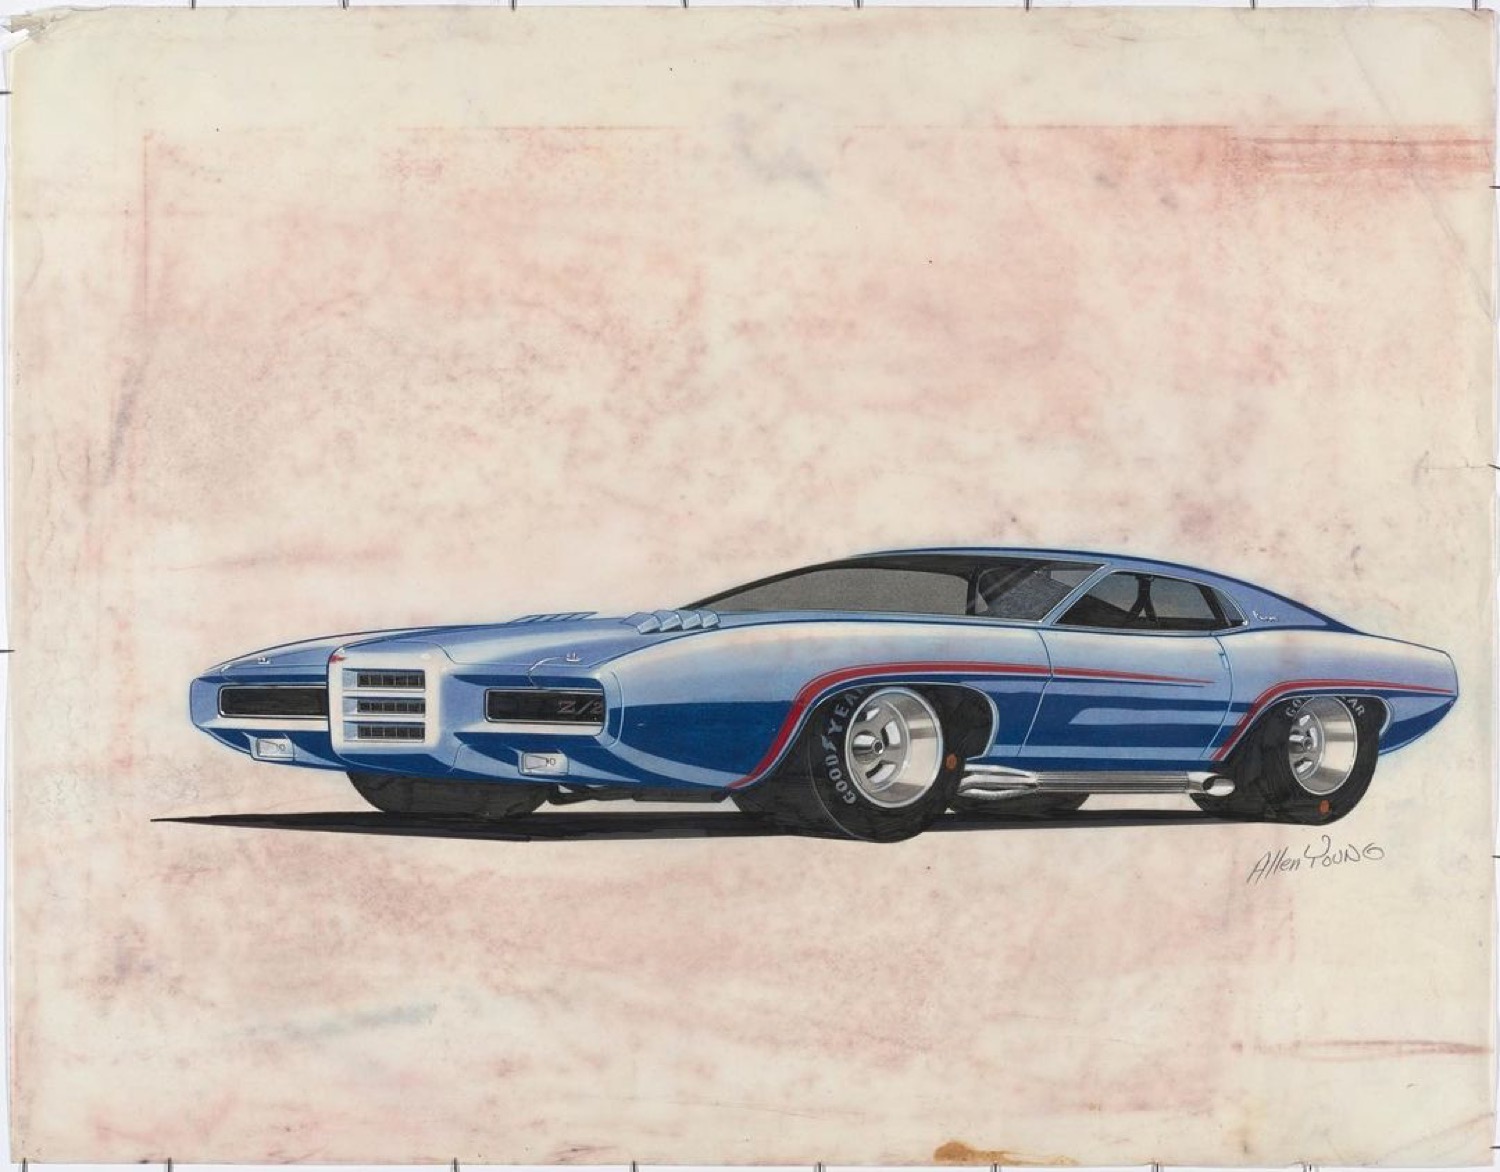 Gm Design Team Releases 1968 Drawing Of Chevy Camaro Z 28 Proposal